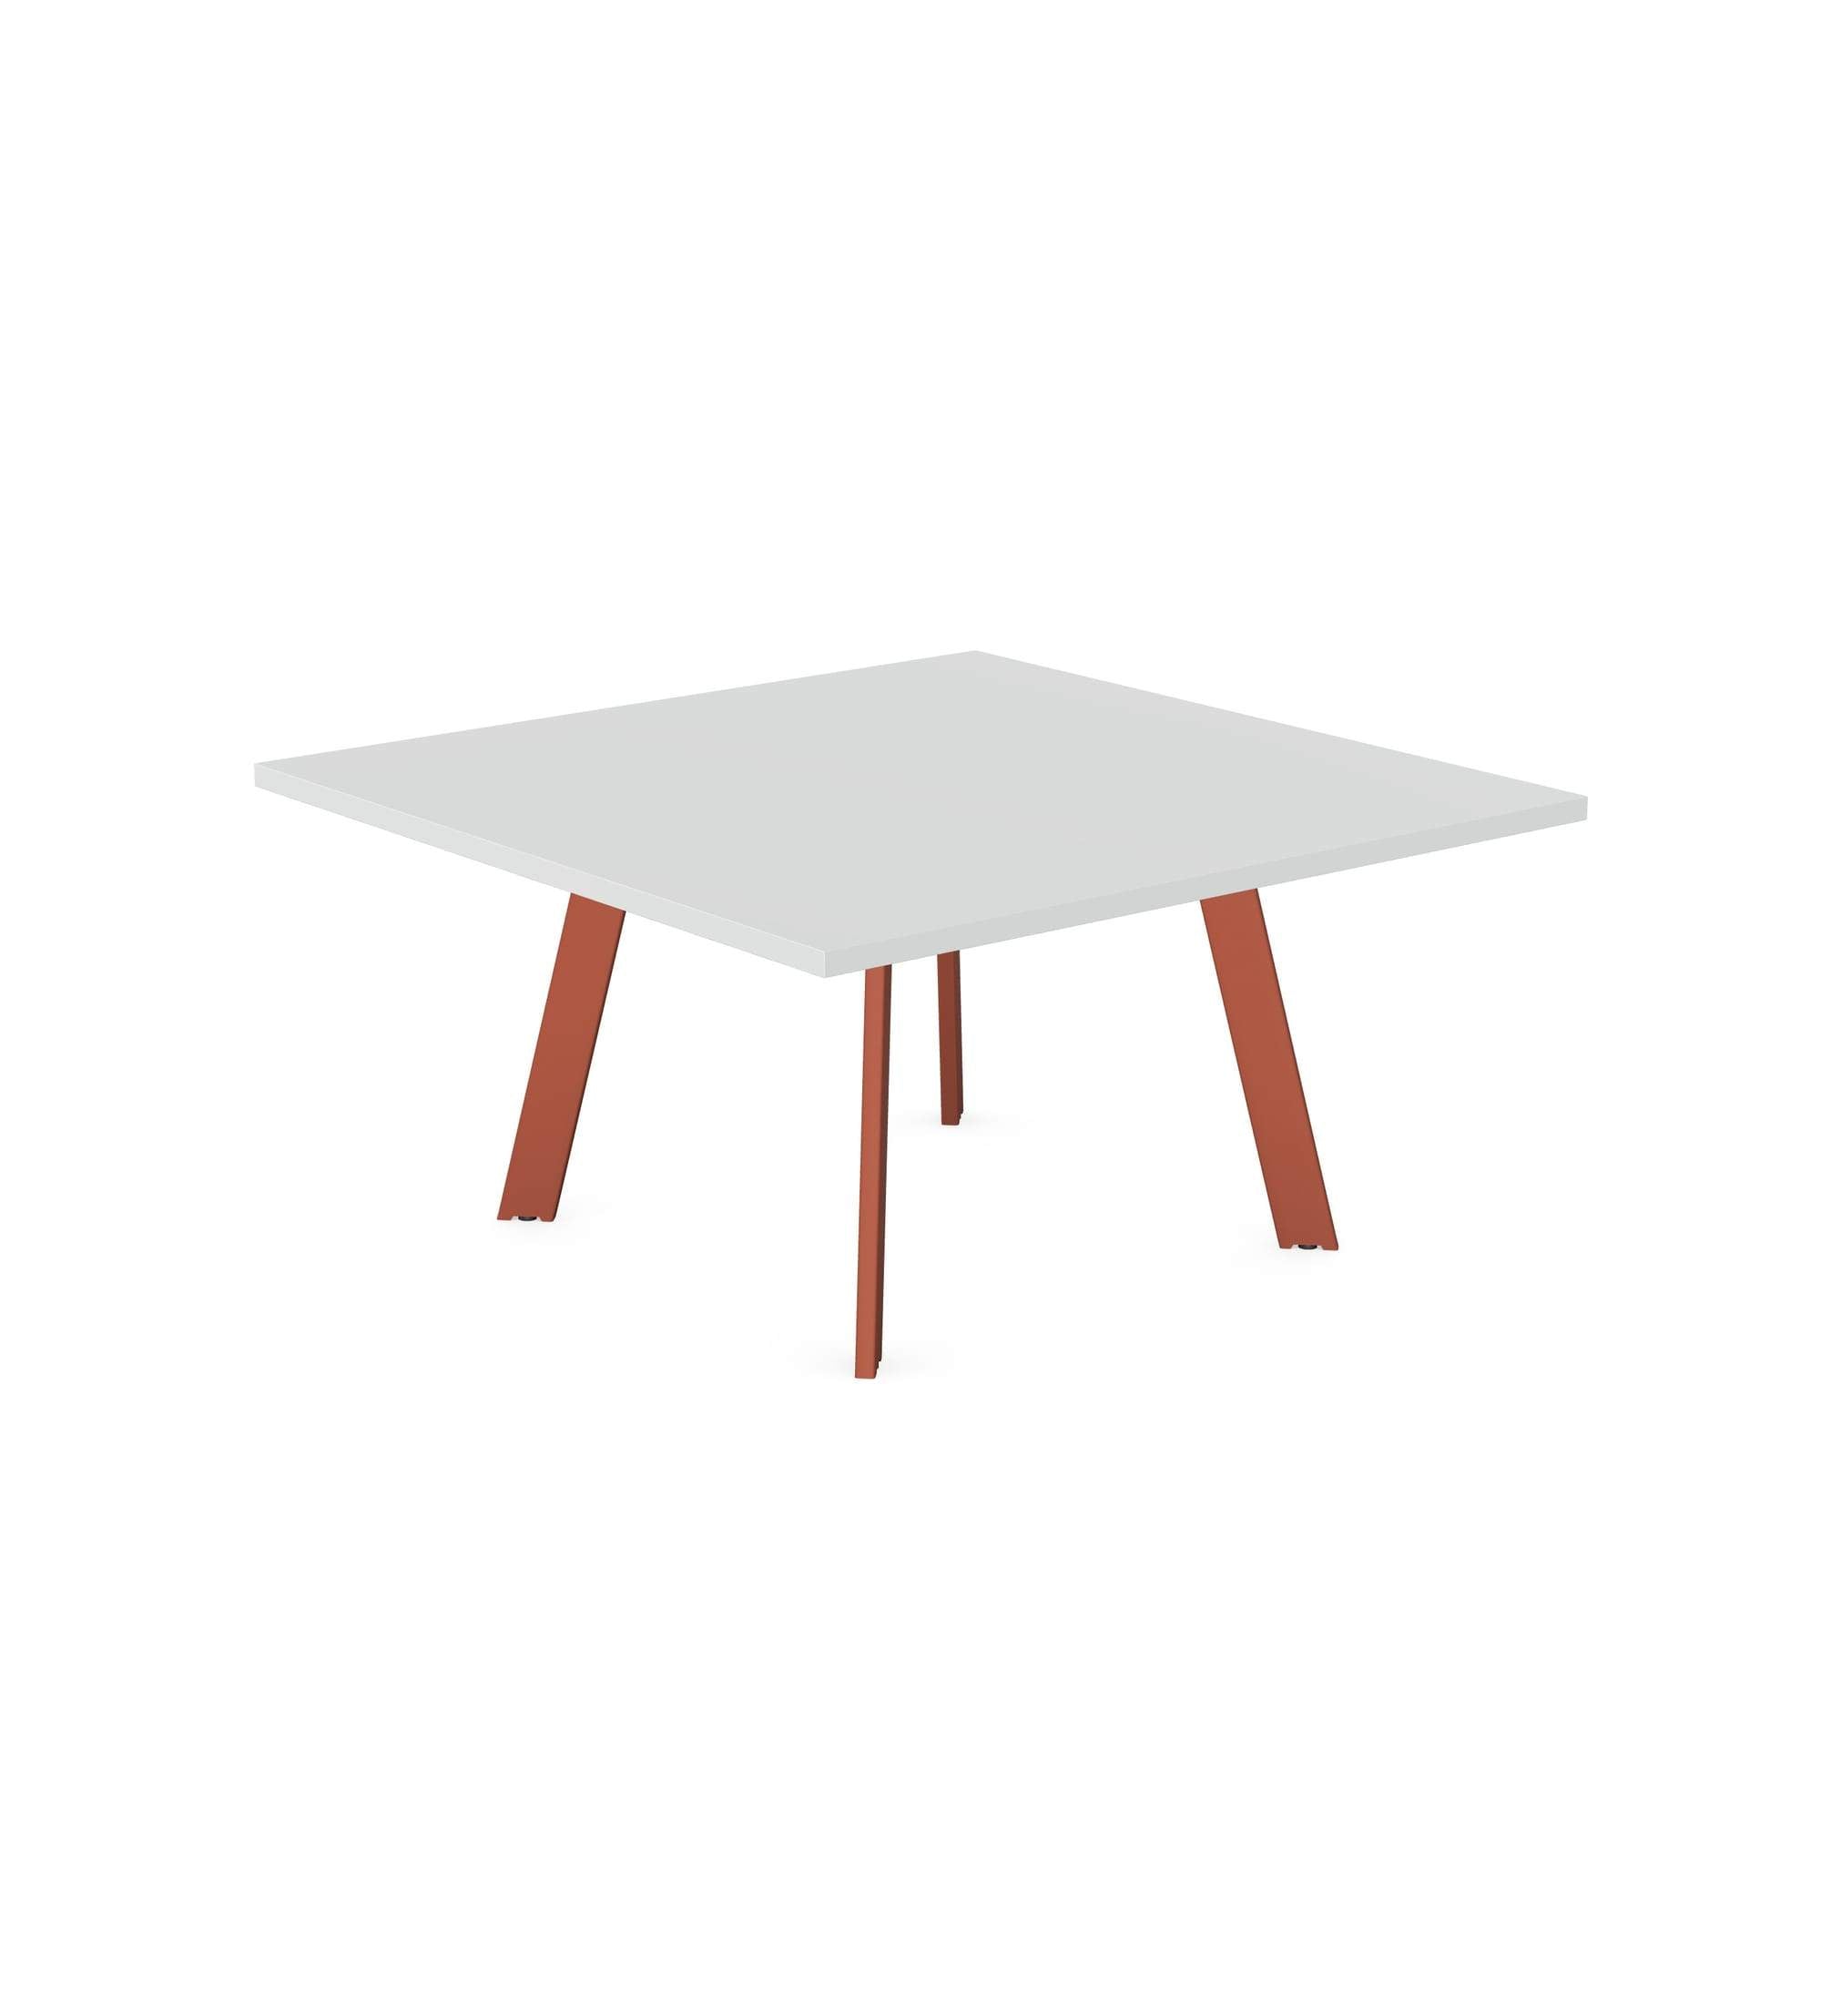 Axy-Line - Low Occasional Tables, Squared Tops, Leg-A